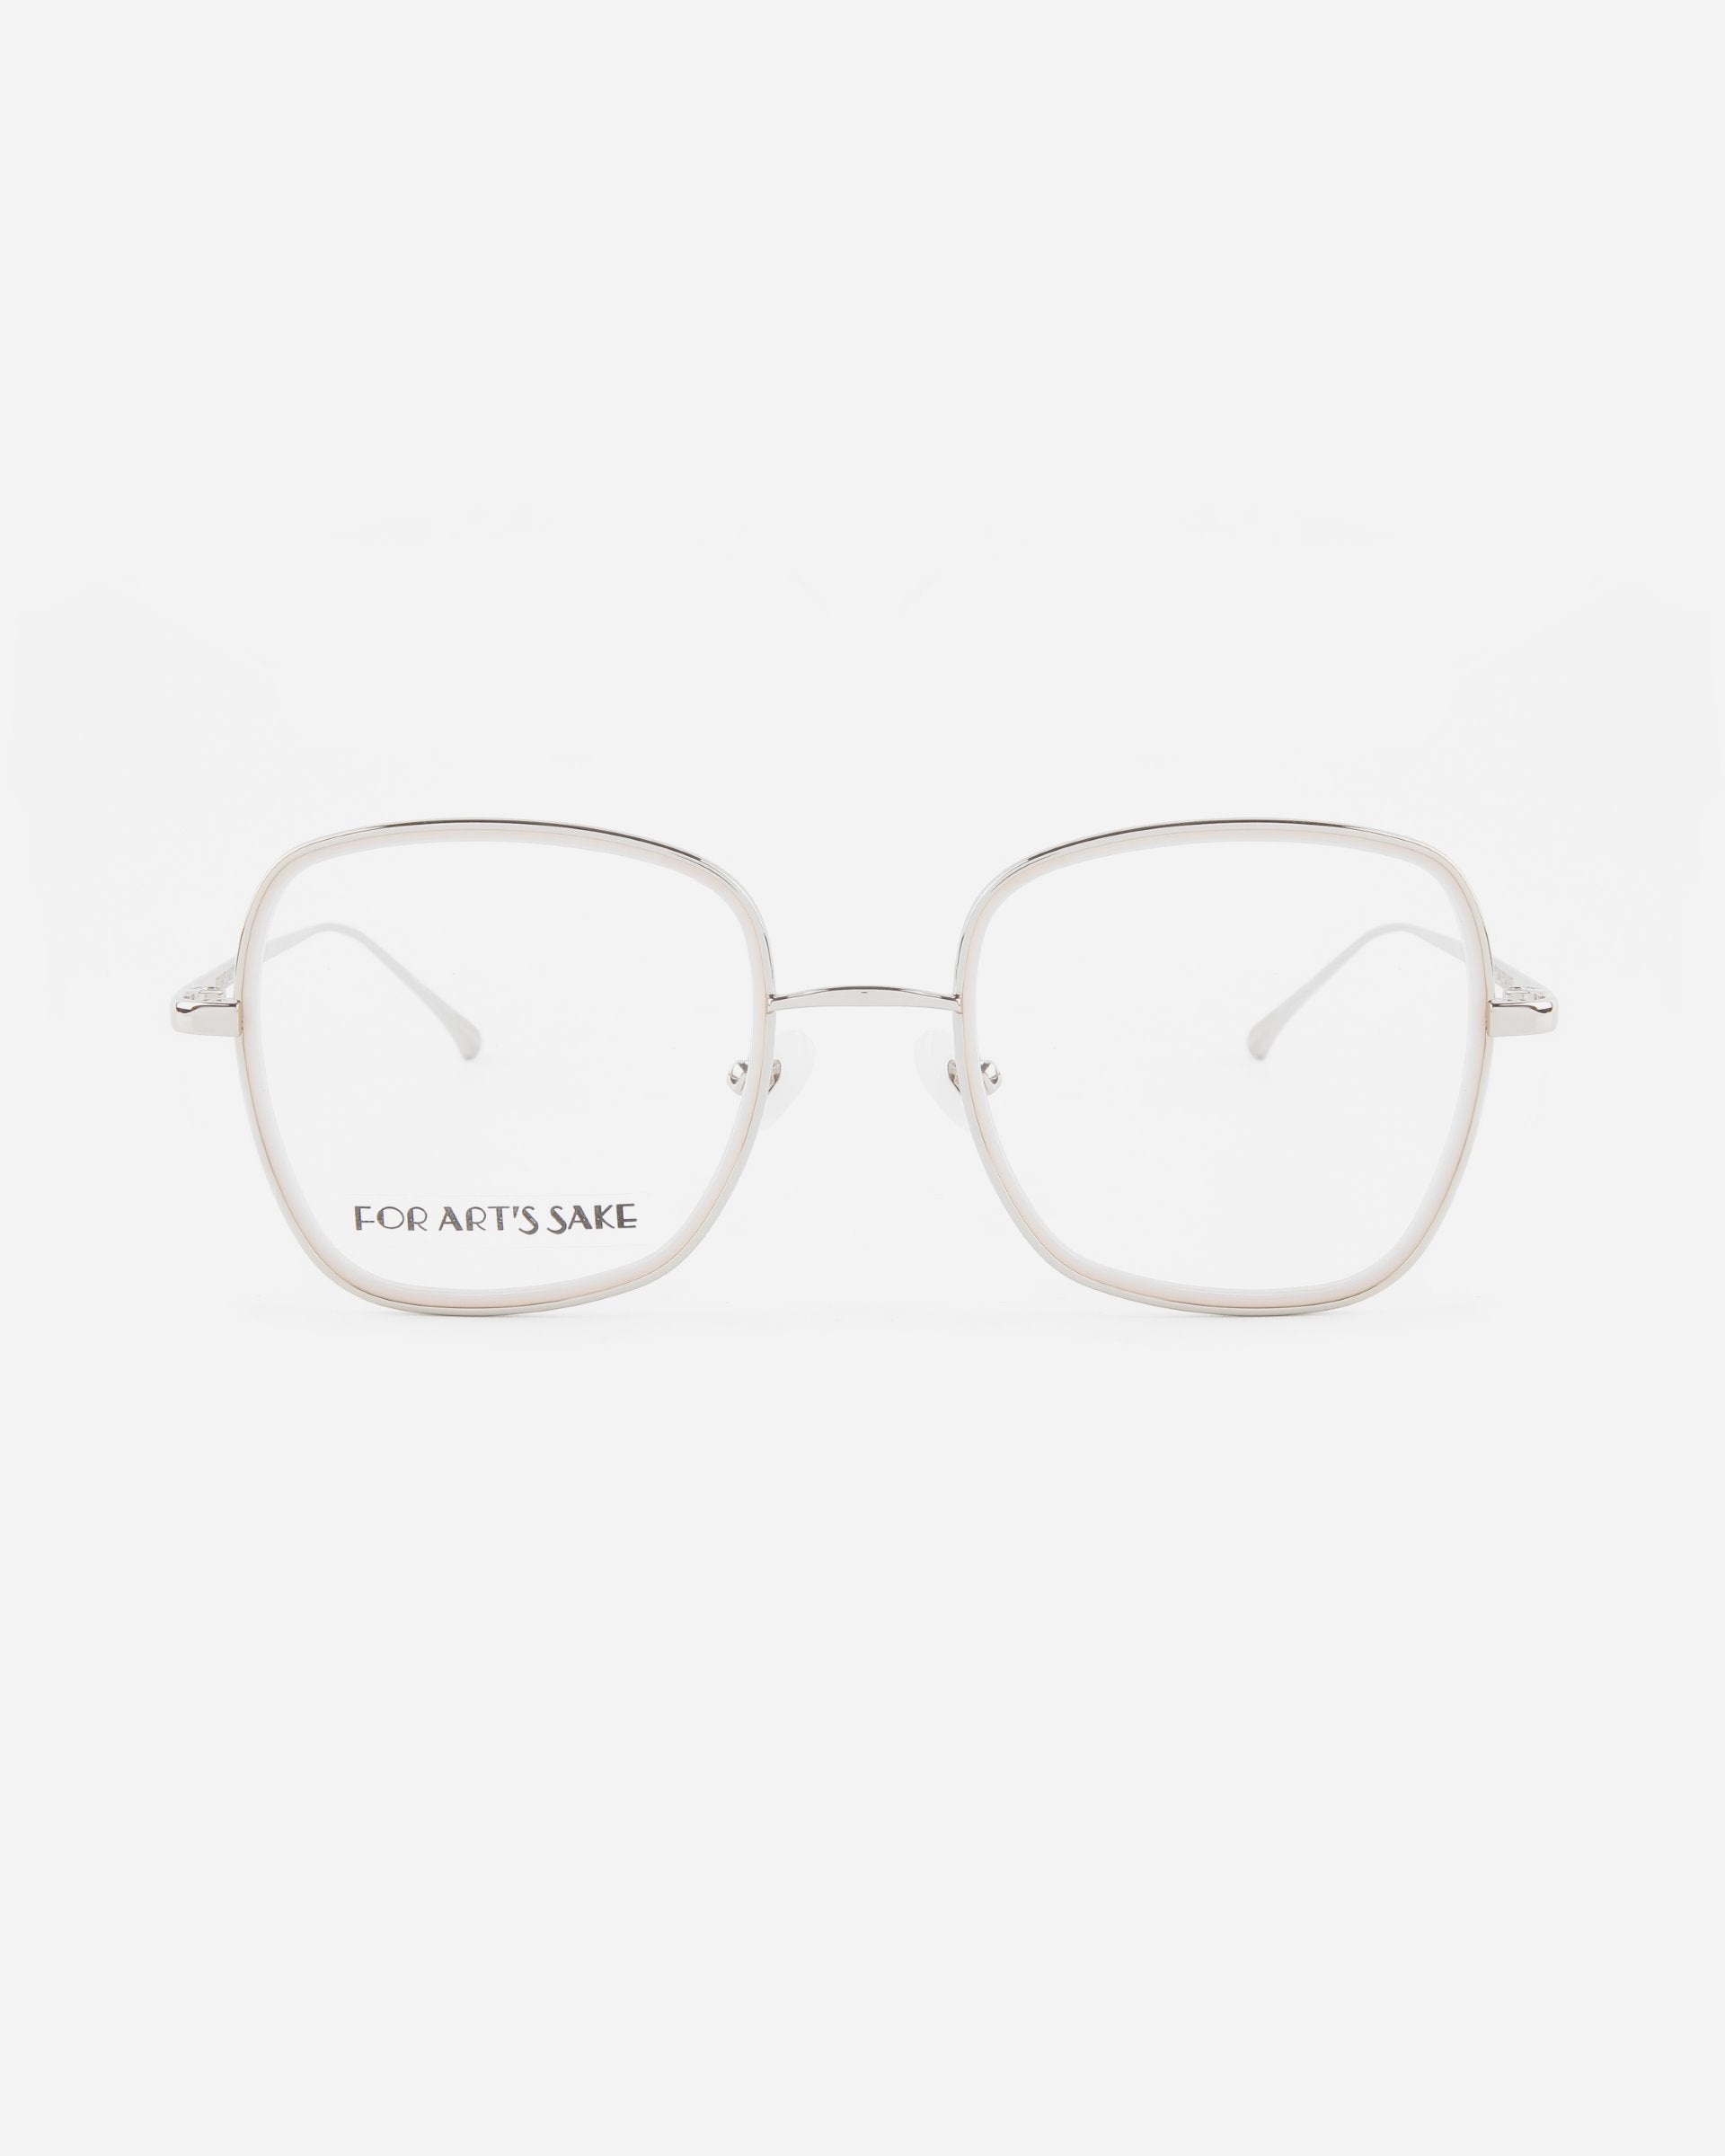 A pair of square-shaped, rimless eyeglasses with thin metal temples. The words "For Art's Sake®" are printed in small black capital letters on the left lens. These stylish frames, named *Coconut*, are enhanced with 18-karat gold-plated details, set against a plain white background.